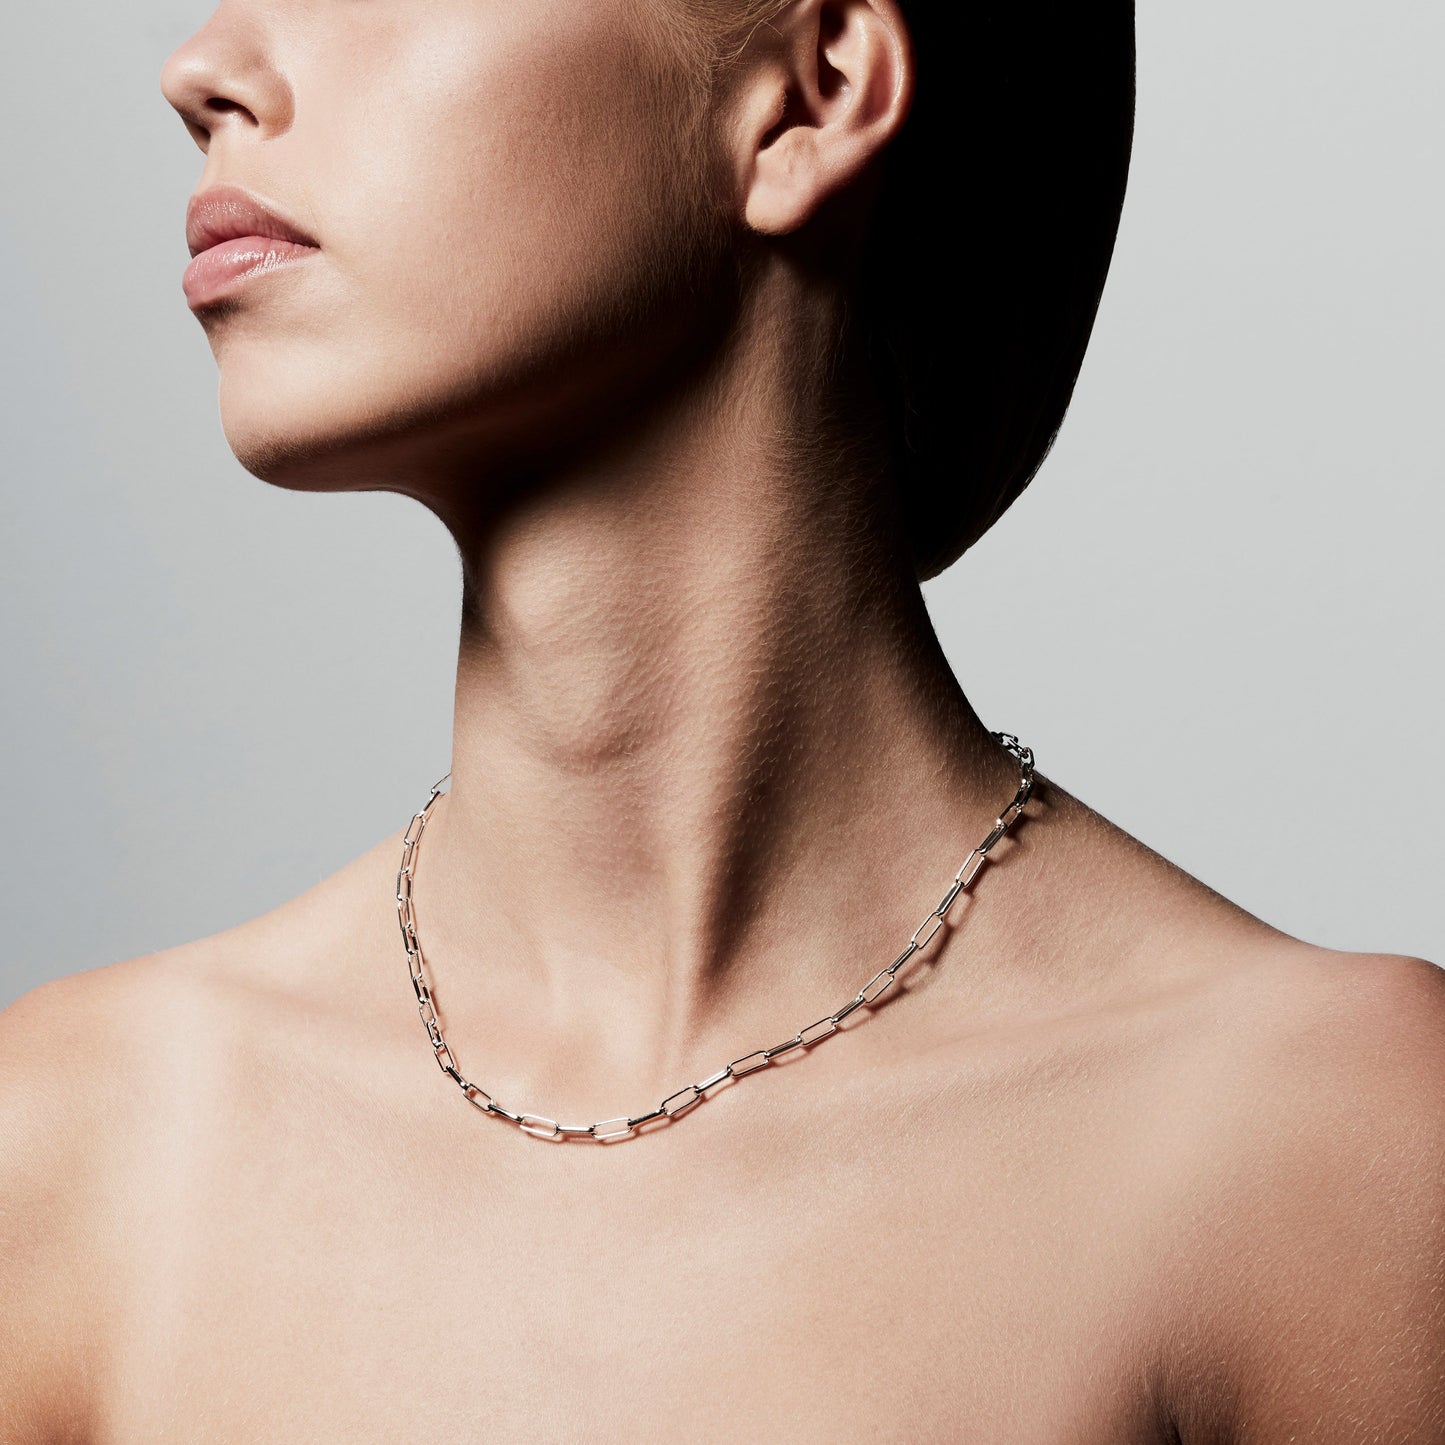 Ronja Necklace - Silver Plated